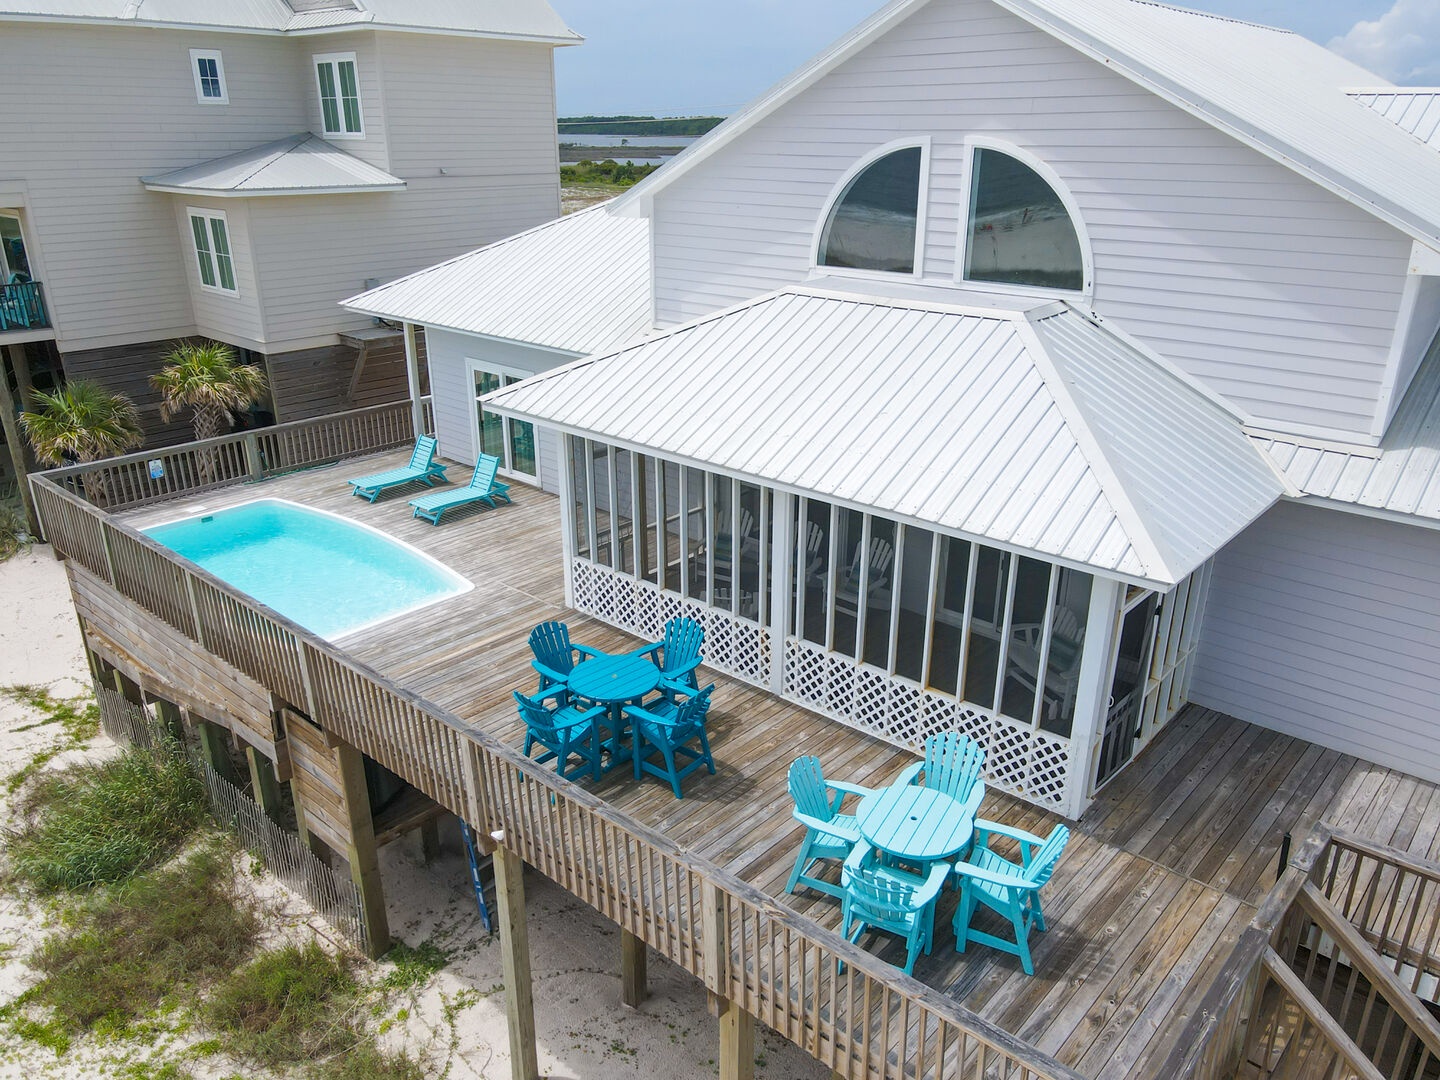 Sand Dollar can sleep up to 18 people and has a screened-in porch